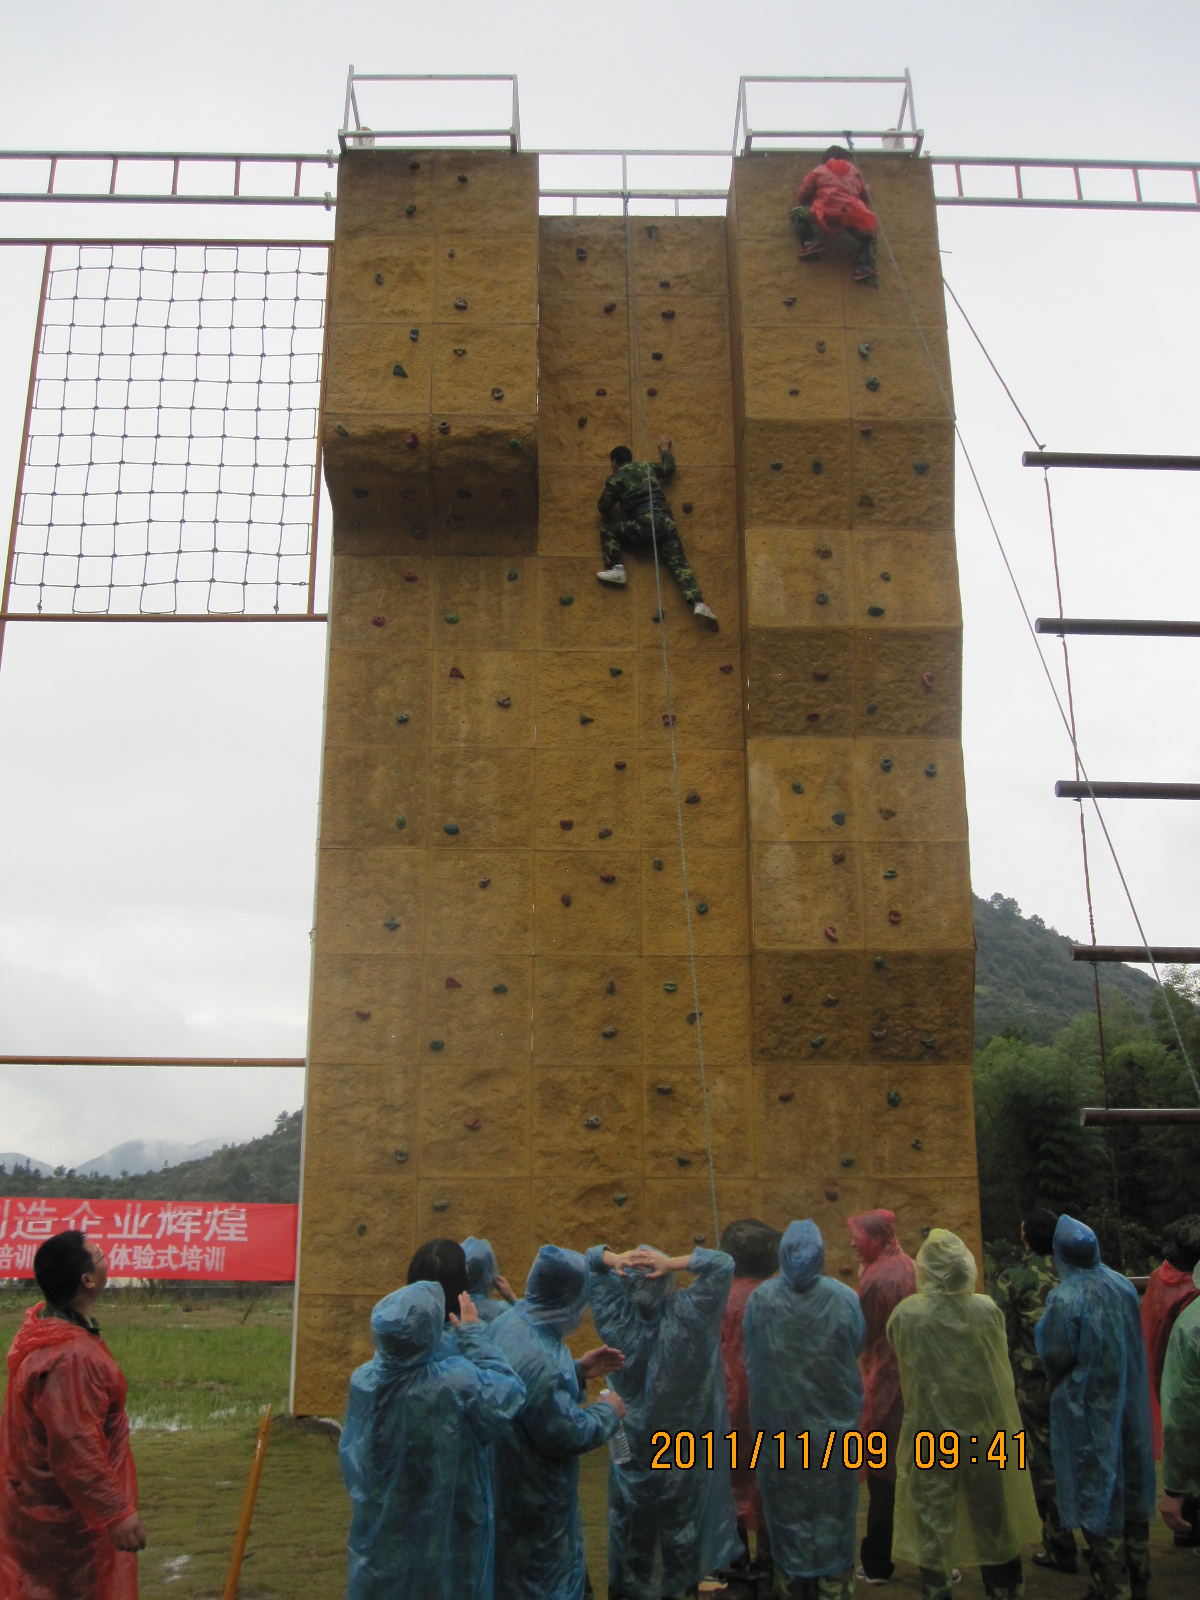 climbing challenges